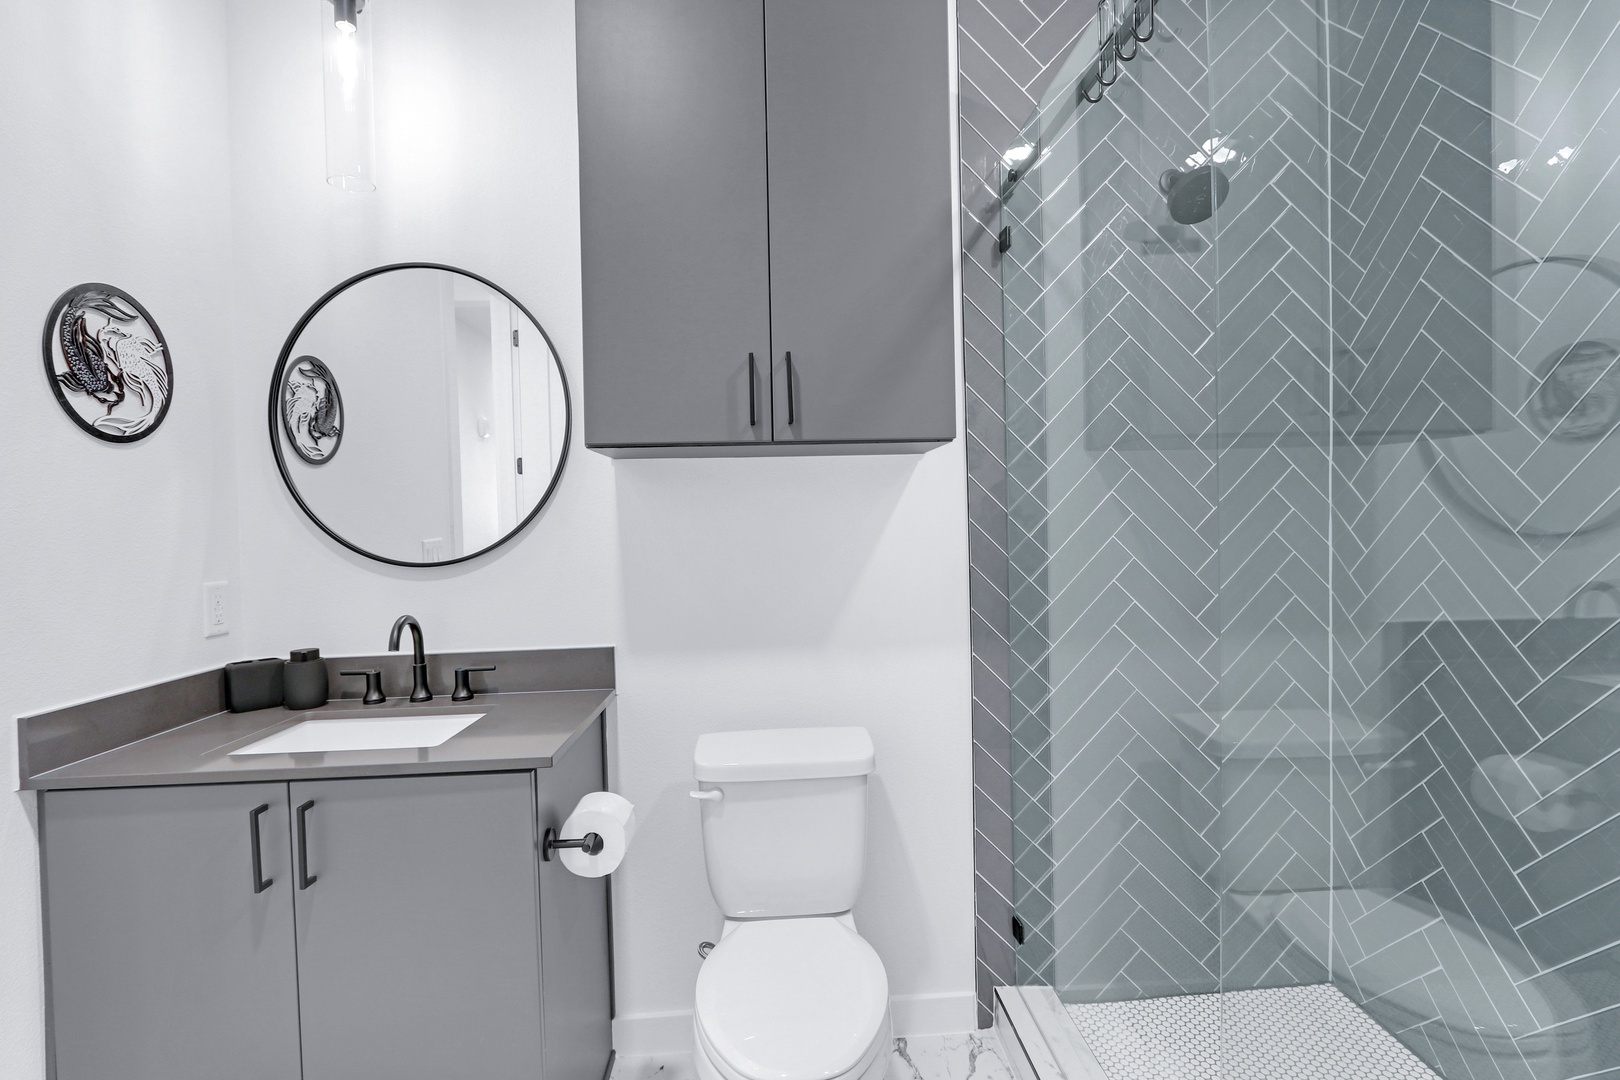 The sophisticated full bath includes a single vanity & glass shower